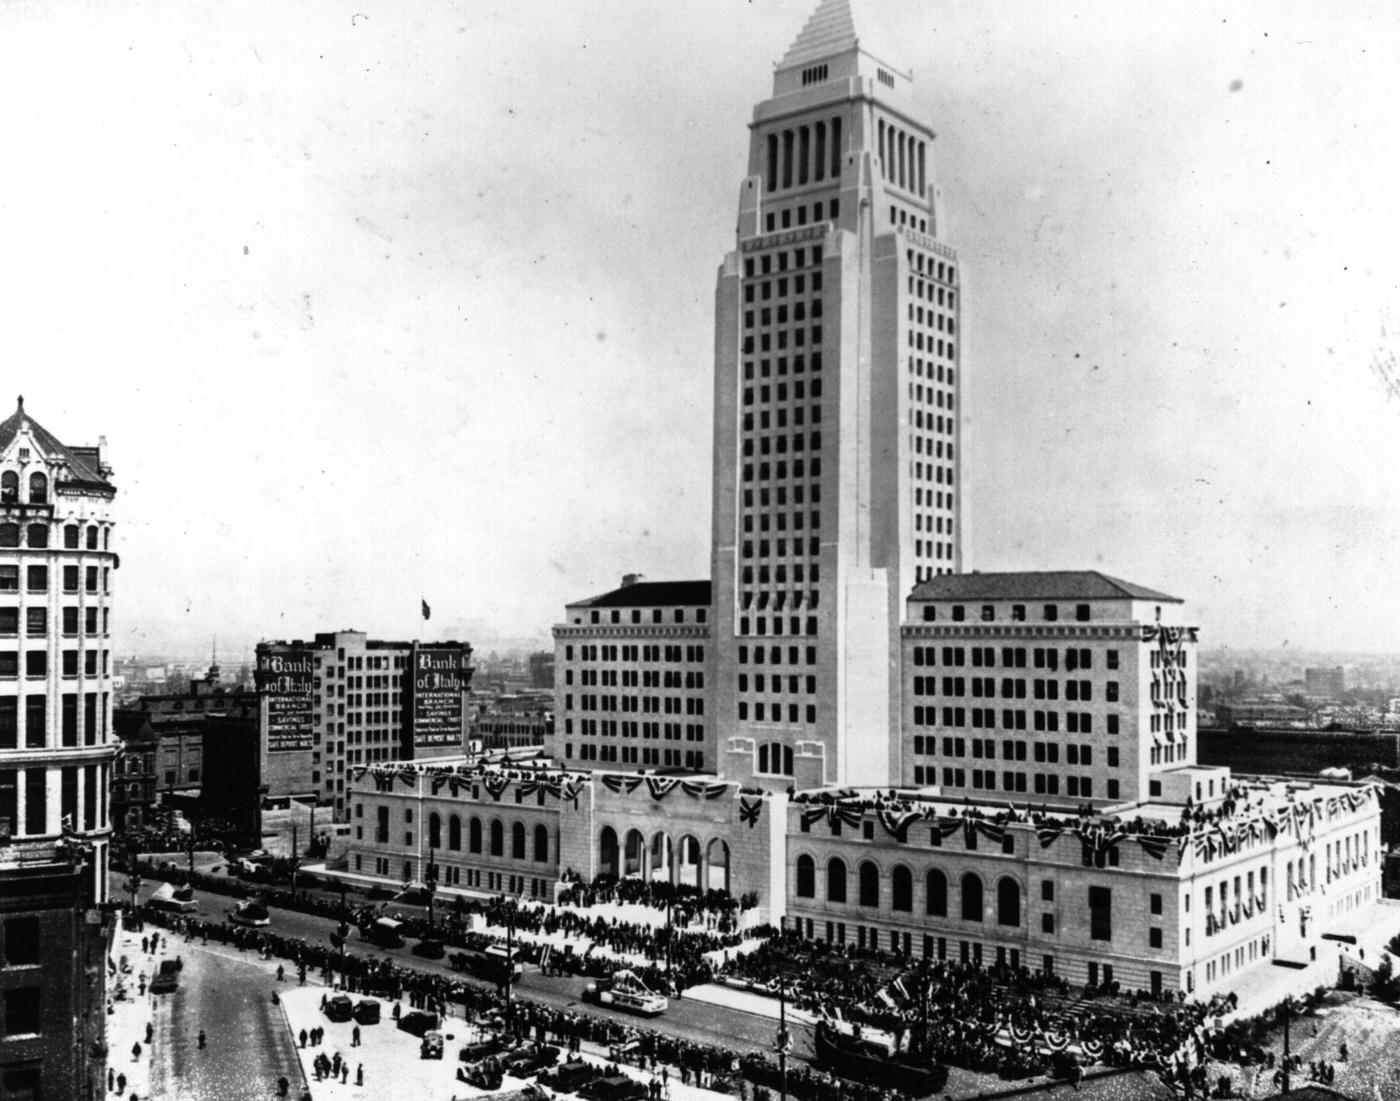 A procession passes Los Angeles' new $10,000,000 City Hall at the opening ceremony for the building which is surmounted by the Lindbergh Beacon 500 feet above street level - December 4, 1930.